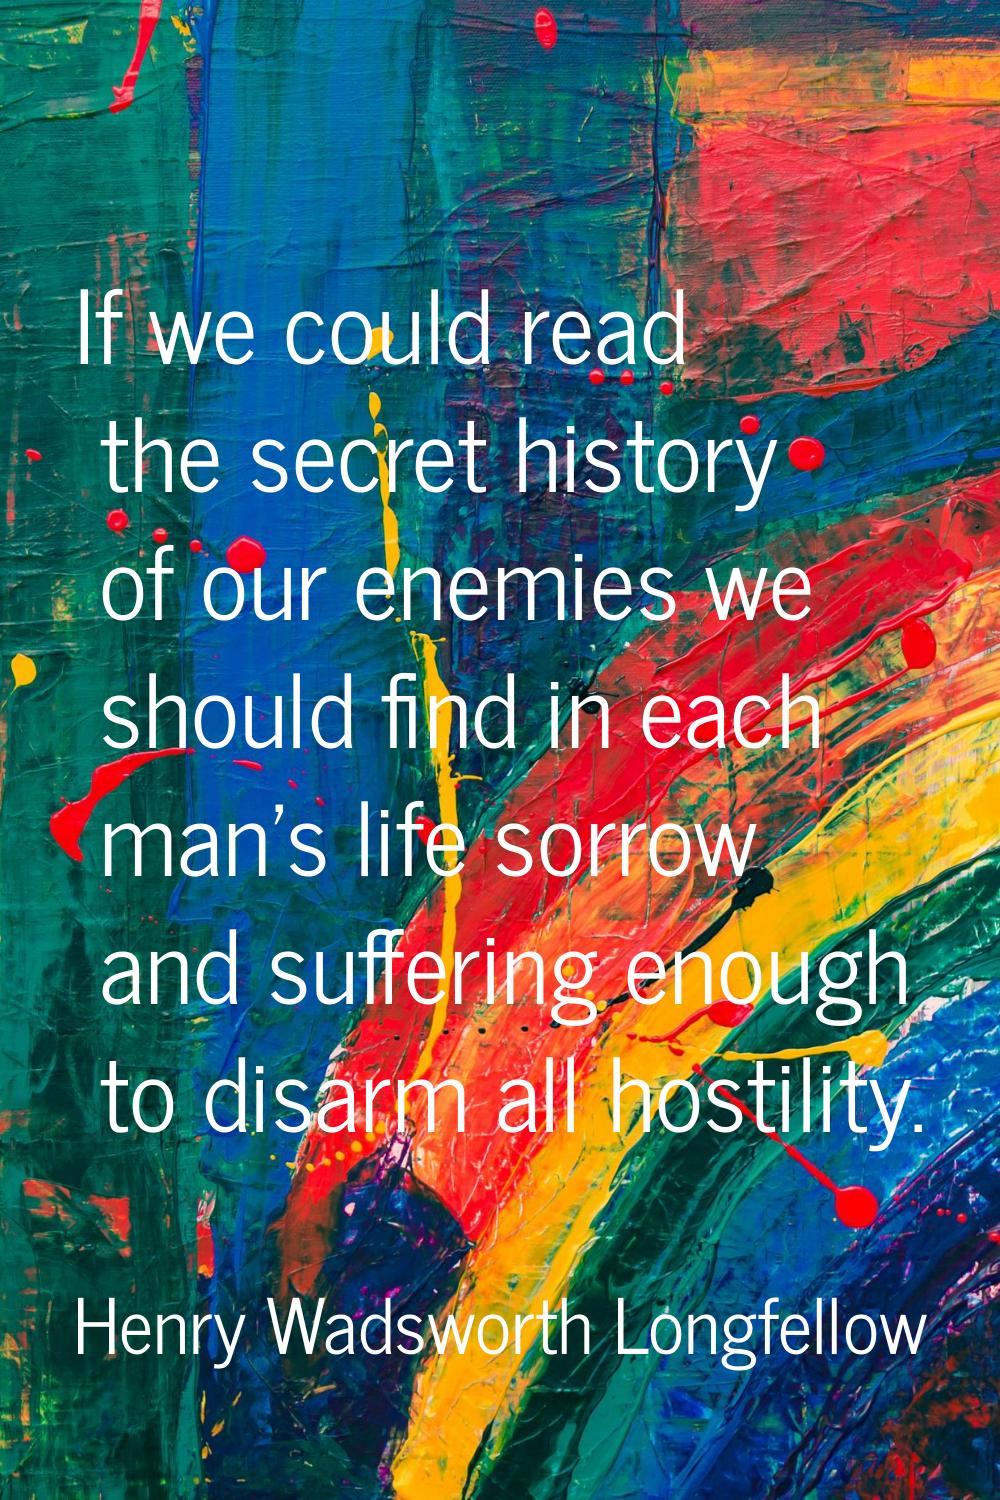 If we could read the secret history of our enemies we should find in each man's life sorrow and suf